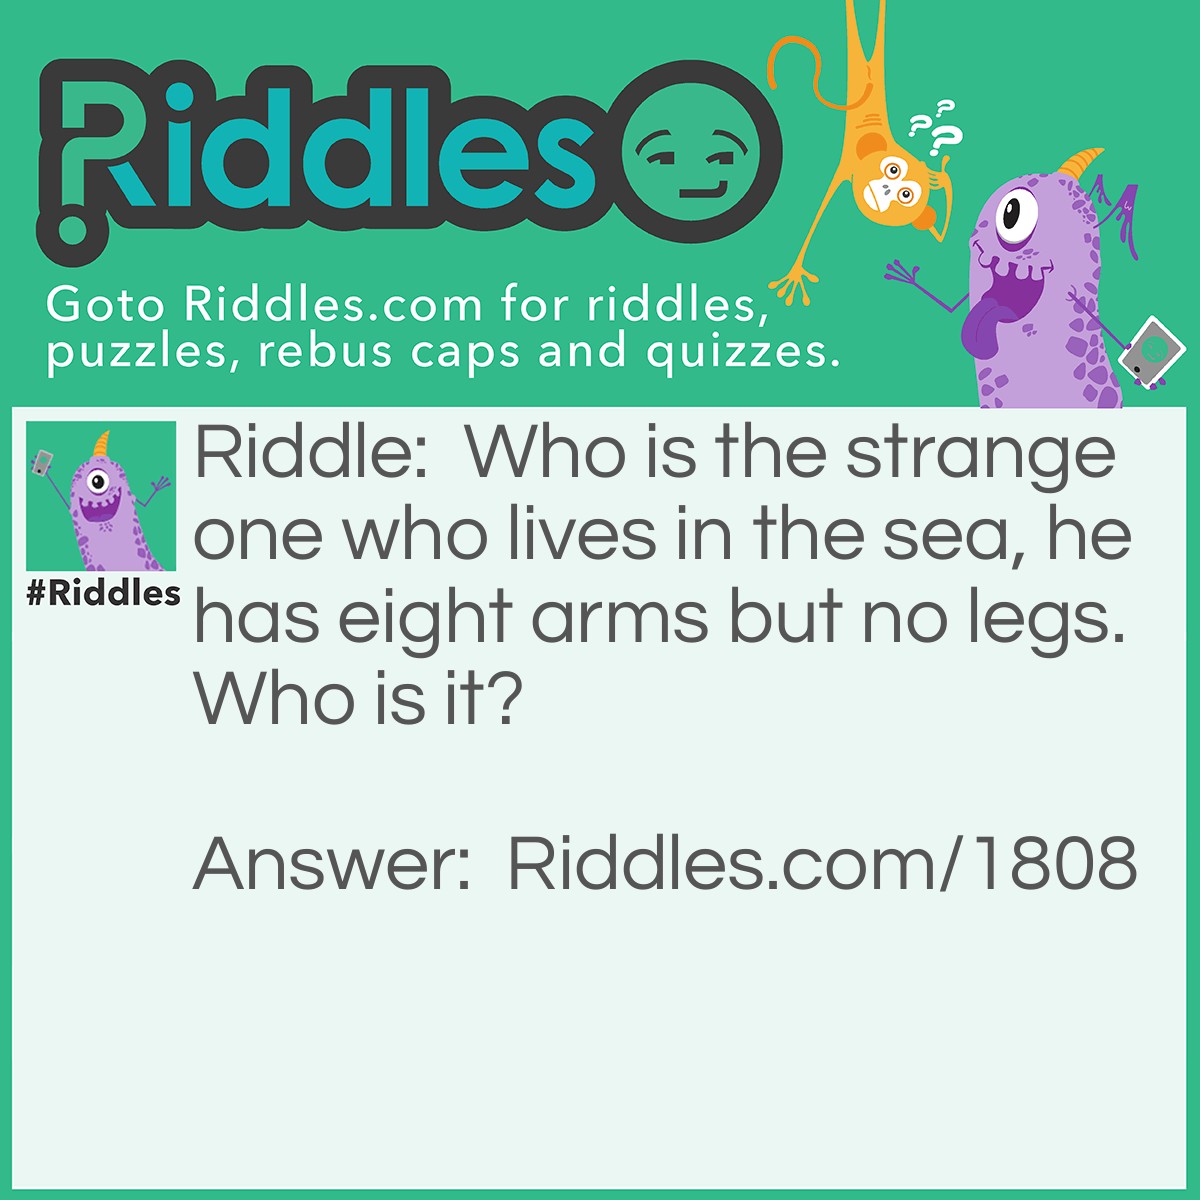 Riddle: Who is the strange one who lives in the sea, he has eight arms but no legs. Who is it? Answer: An Octopus.